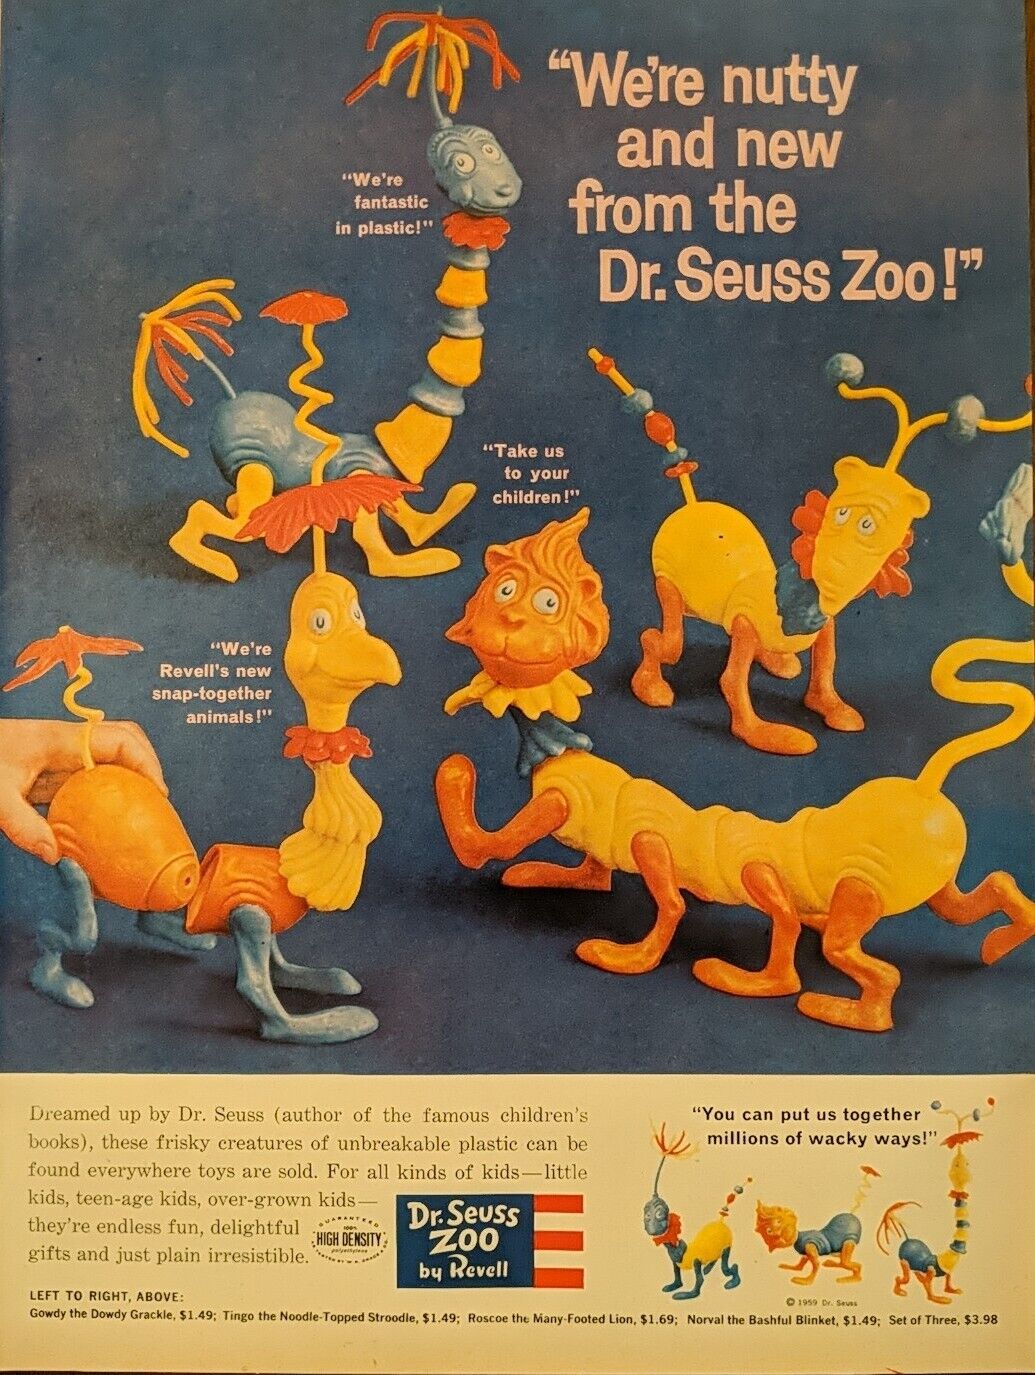 1959 Vintage Dr Suess Zoo Plastic Play Toys For Young Children By Revell